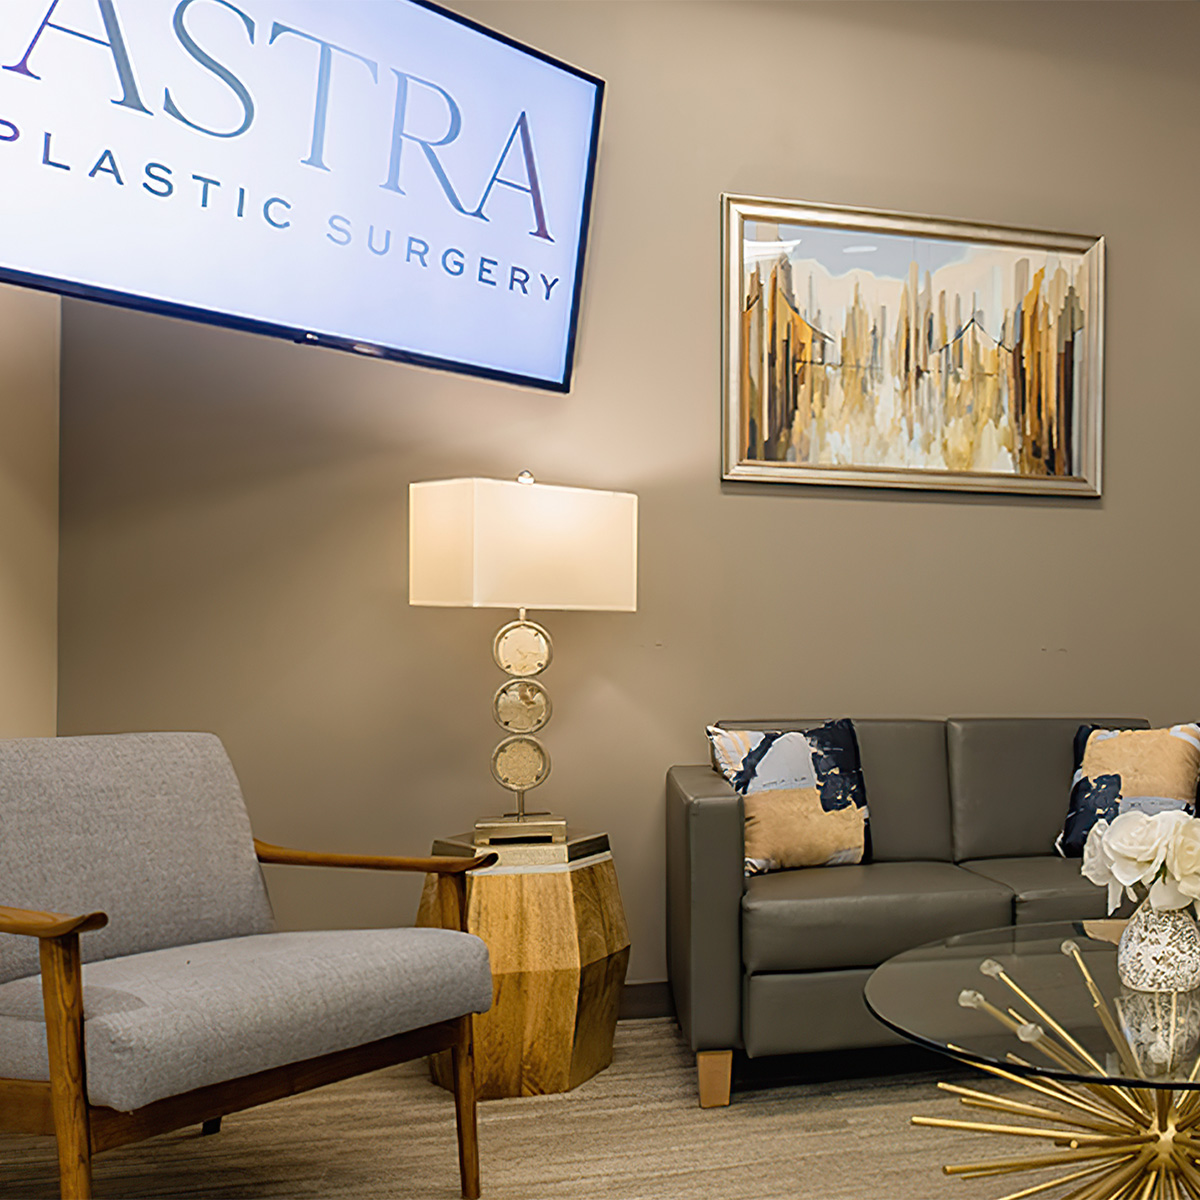 Astra Plastic Surgery in Atlanta, Georgia is located at 5673 Peachtree Dunwoody Road inside the Emory Saint Joseph Medical Complex. At Astra Plastic Surgery our surgeons and staff are dedicated to helping you look and feel your best, and our team is always available to address any of your cosmetic or plastic surgery questions or concerns.